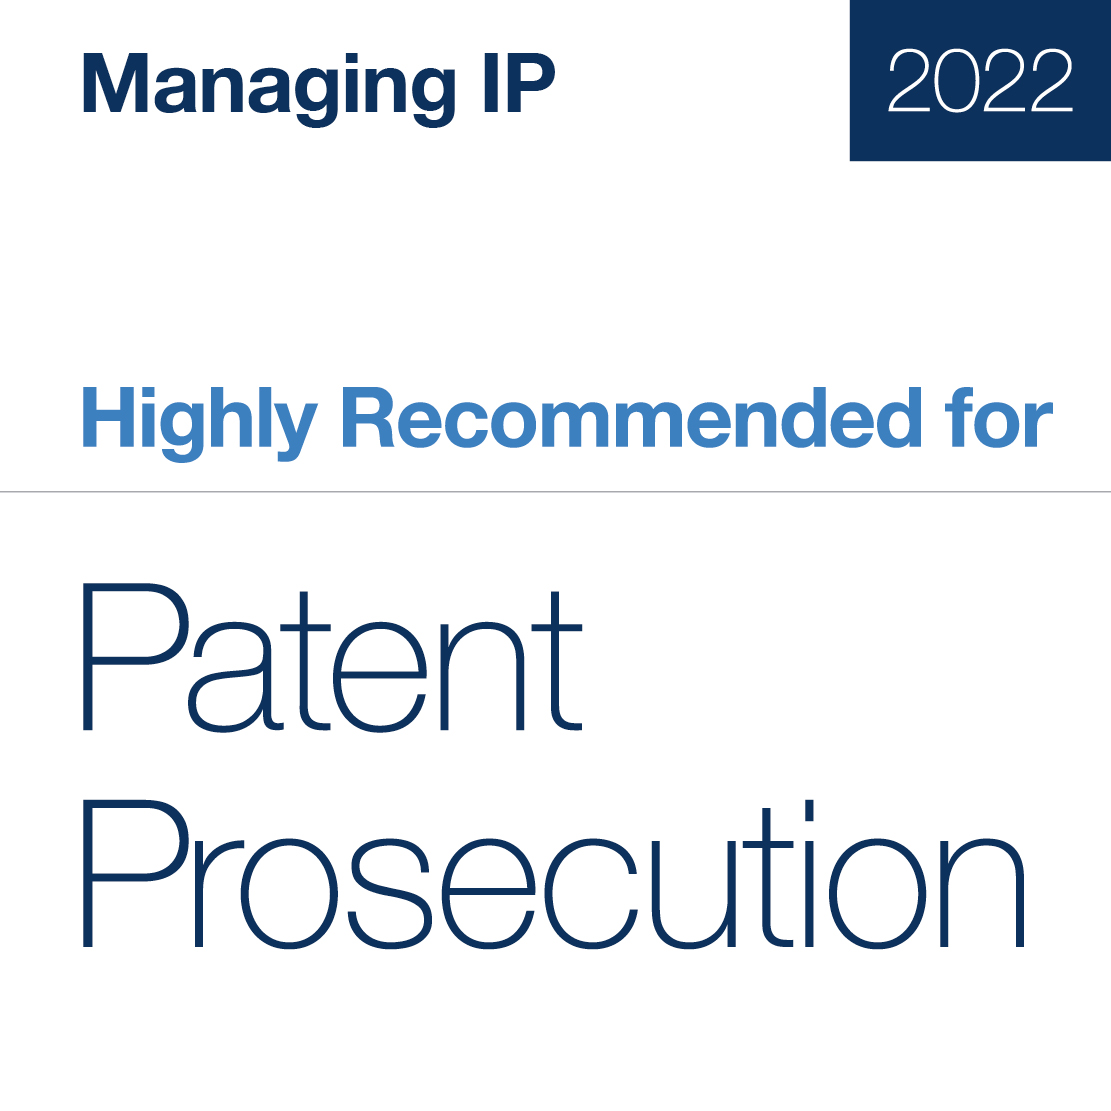 Highly Recommended for Patent Prosecution 2022